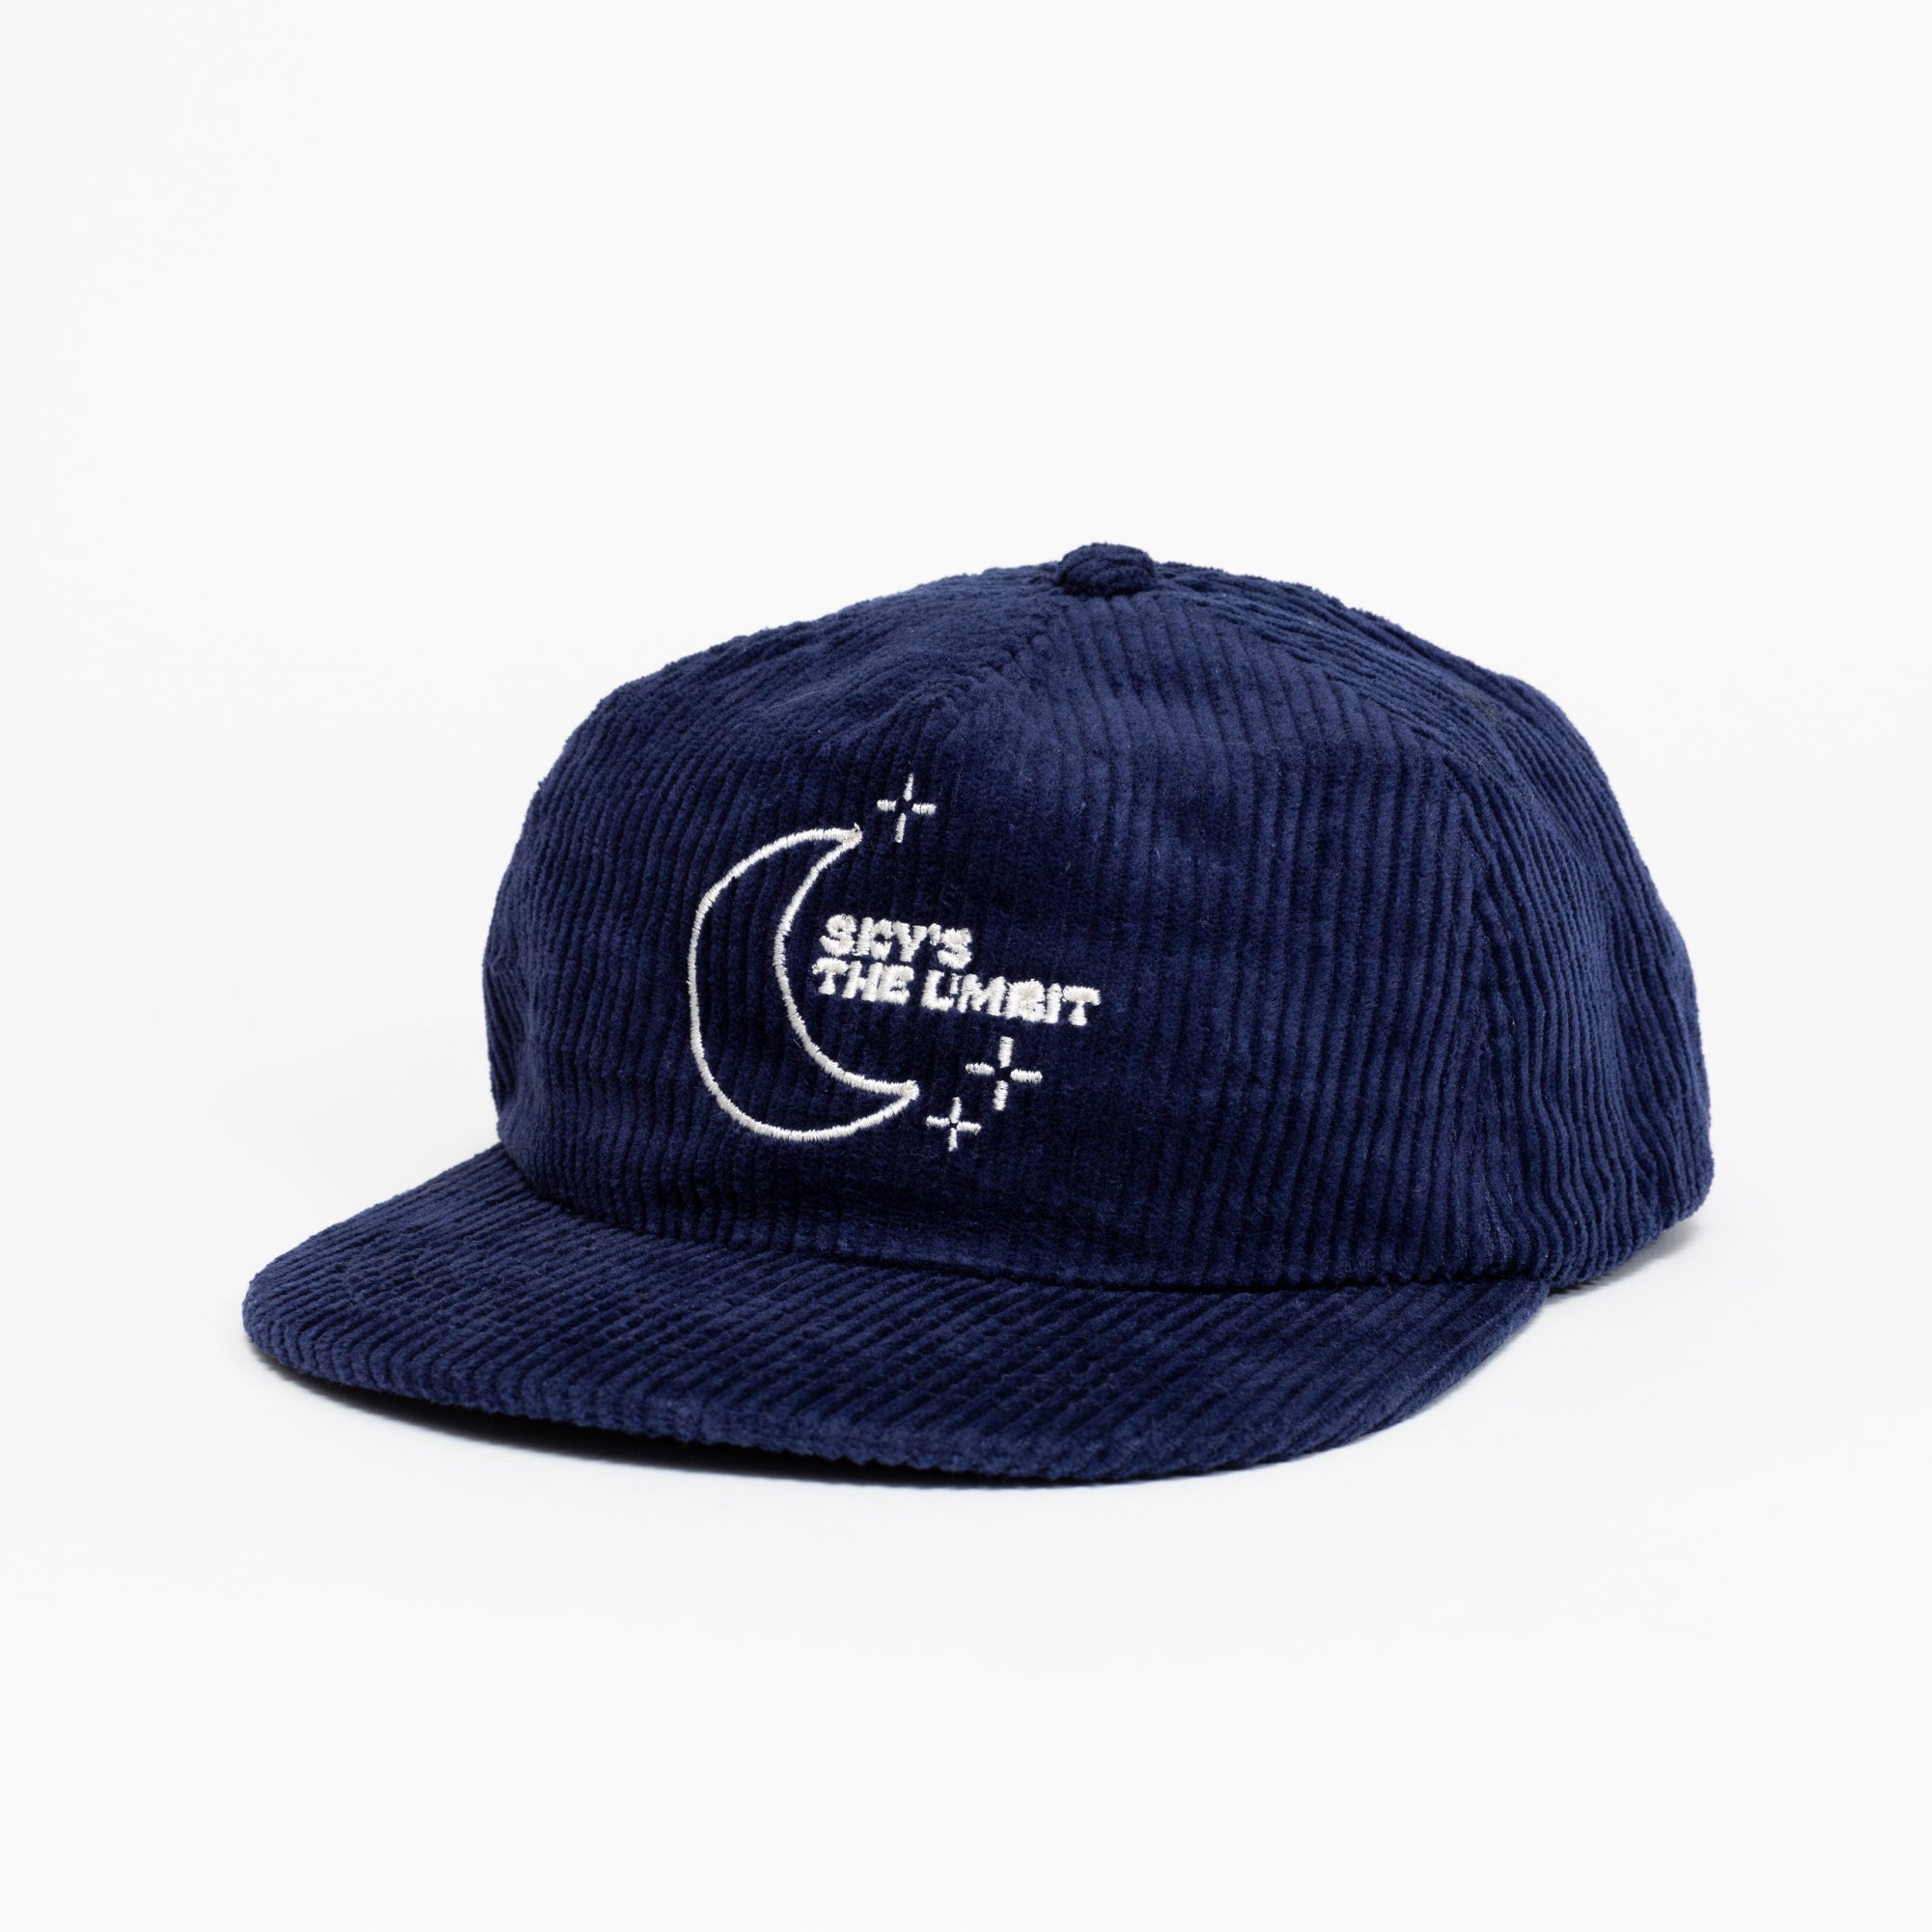 A dark blue baseball cap that has a illustration of the moon and the stars that says in white font "Sky's the Limbit."